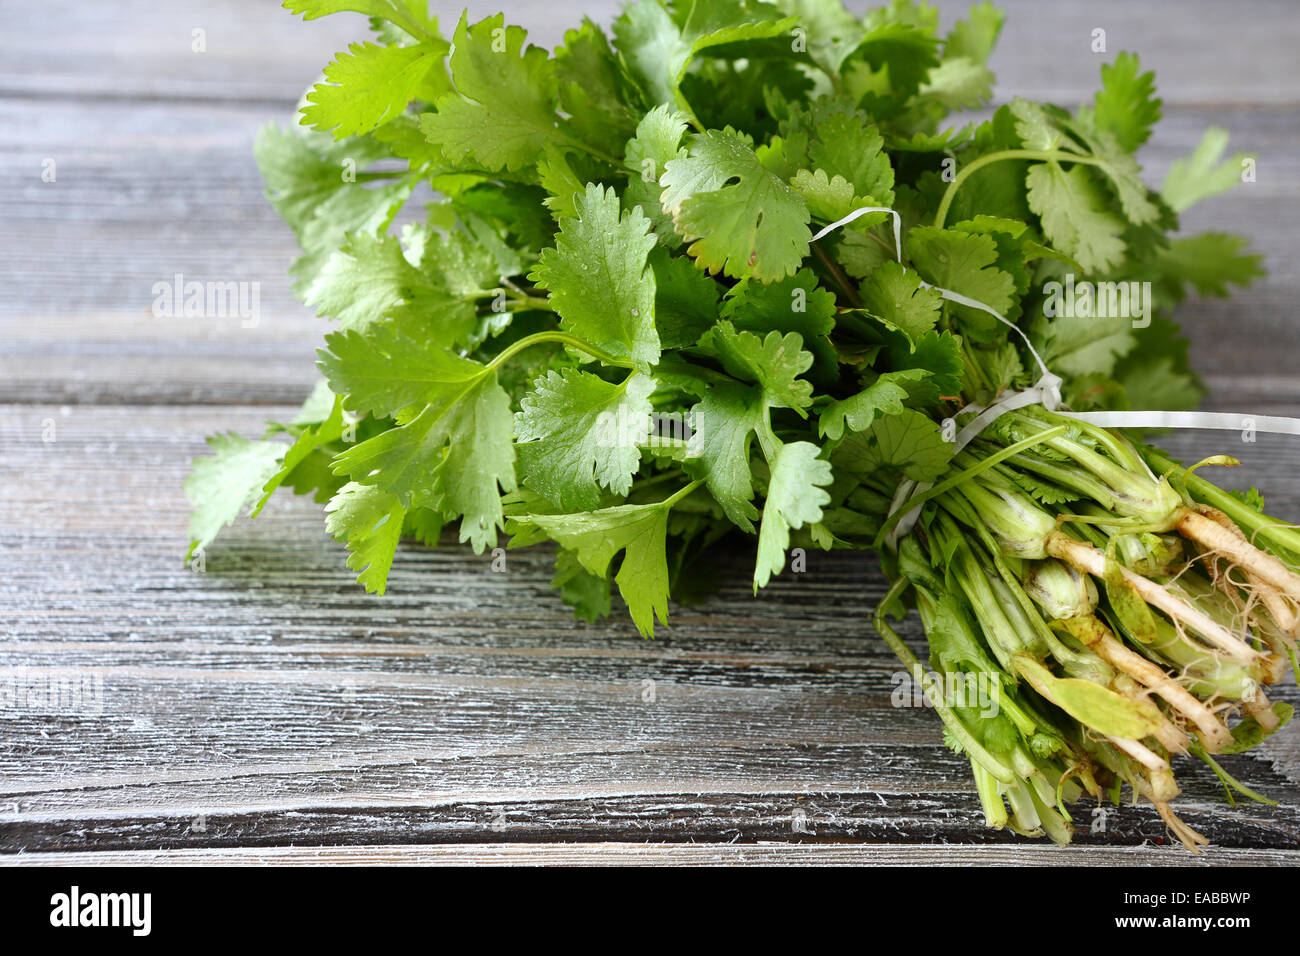 Green cilantro on a wooden boards, food close-up Stock Photo